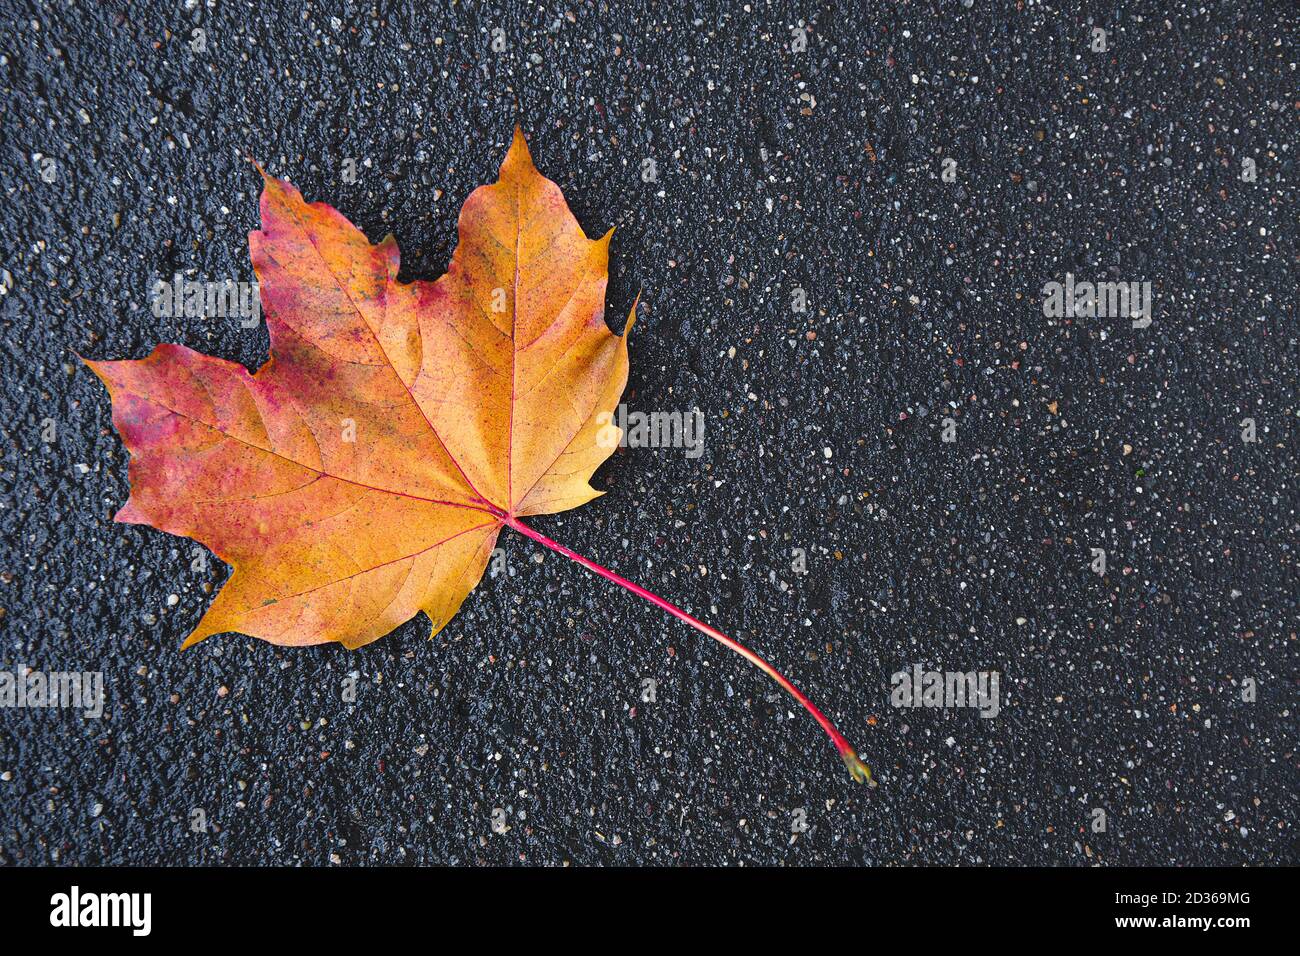 Colorful orange and yellow maple leaf on wet rainy asphalt. Close-up. Empty field, place for text. Autumn composition. Colors of autumn. Stock Photo